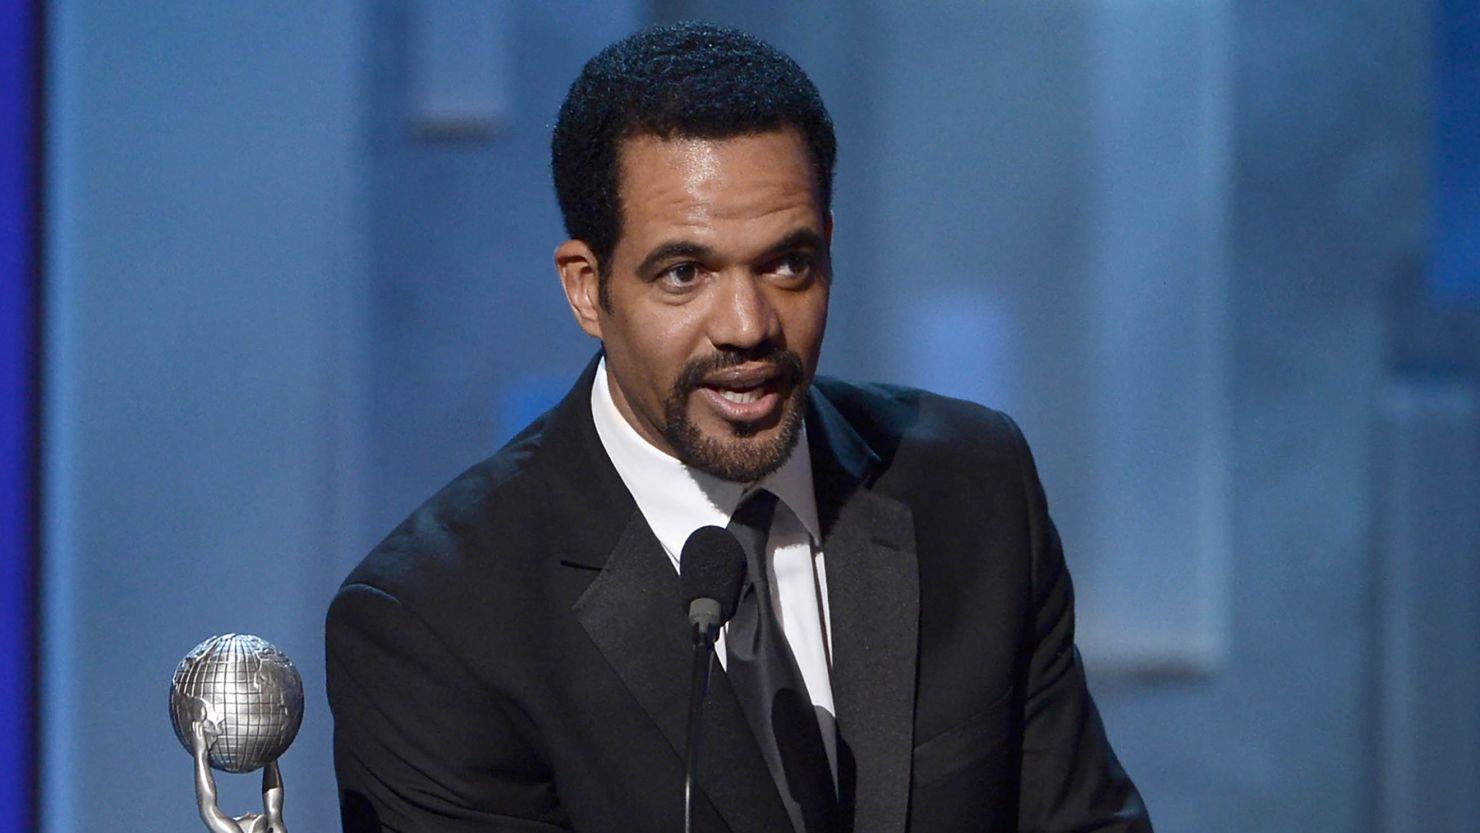 LOS ANGELES, CA - FEBRUARY 01: Actor Kristoff St. John onstage during the 44th NAACP Image Awards at The Shrine Auditorium on February 1, 2013 in Los Angeles, California.  (Photo by Kevin Winter/Getty Images for NAACP Image Awards)